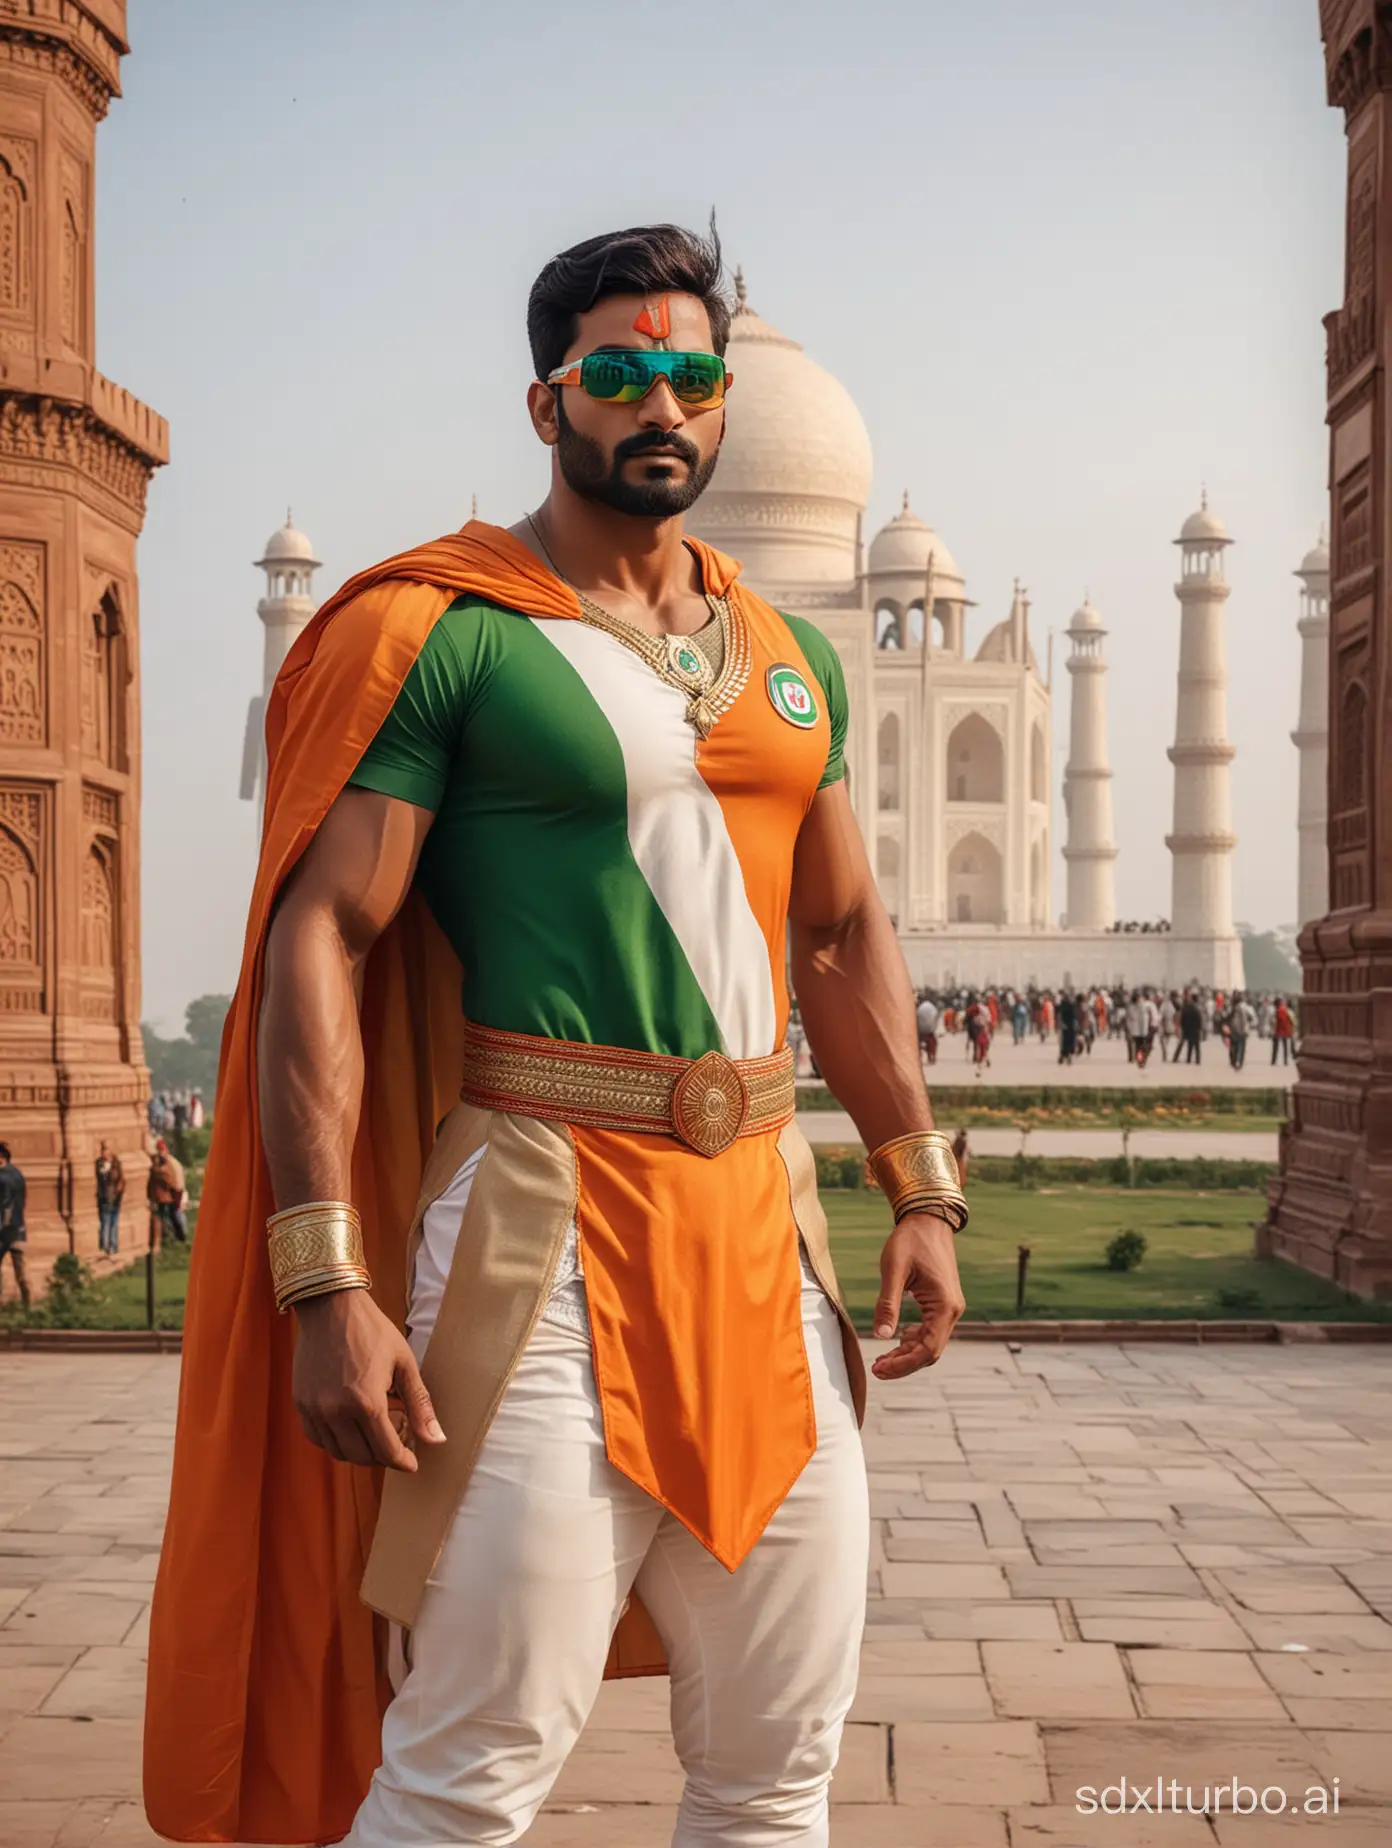 Create an Indian superhero with a costume based on Indian flag colors and Indian flag logo on the chest. The costume should consist of 60% orange, 30% white, and 10% green. The costume should include armor, and the superhero should have good muscles. The superhero is standing near the Taj Mahal.